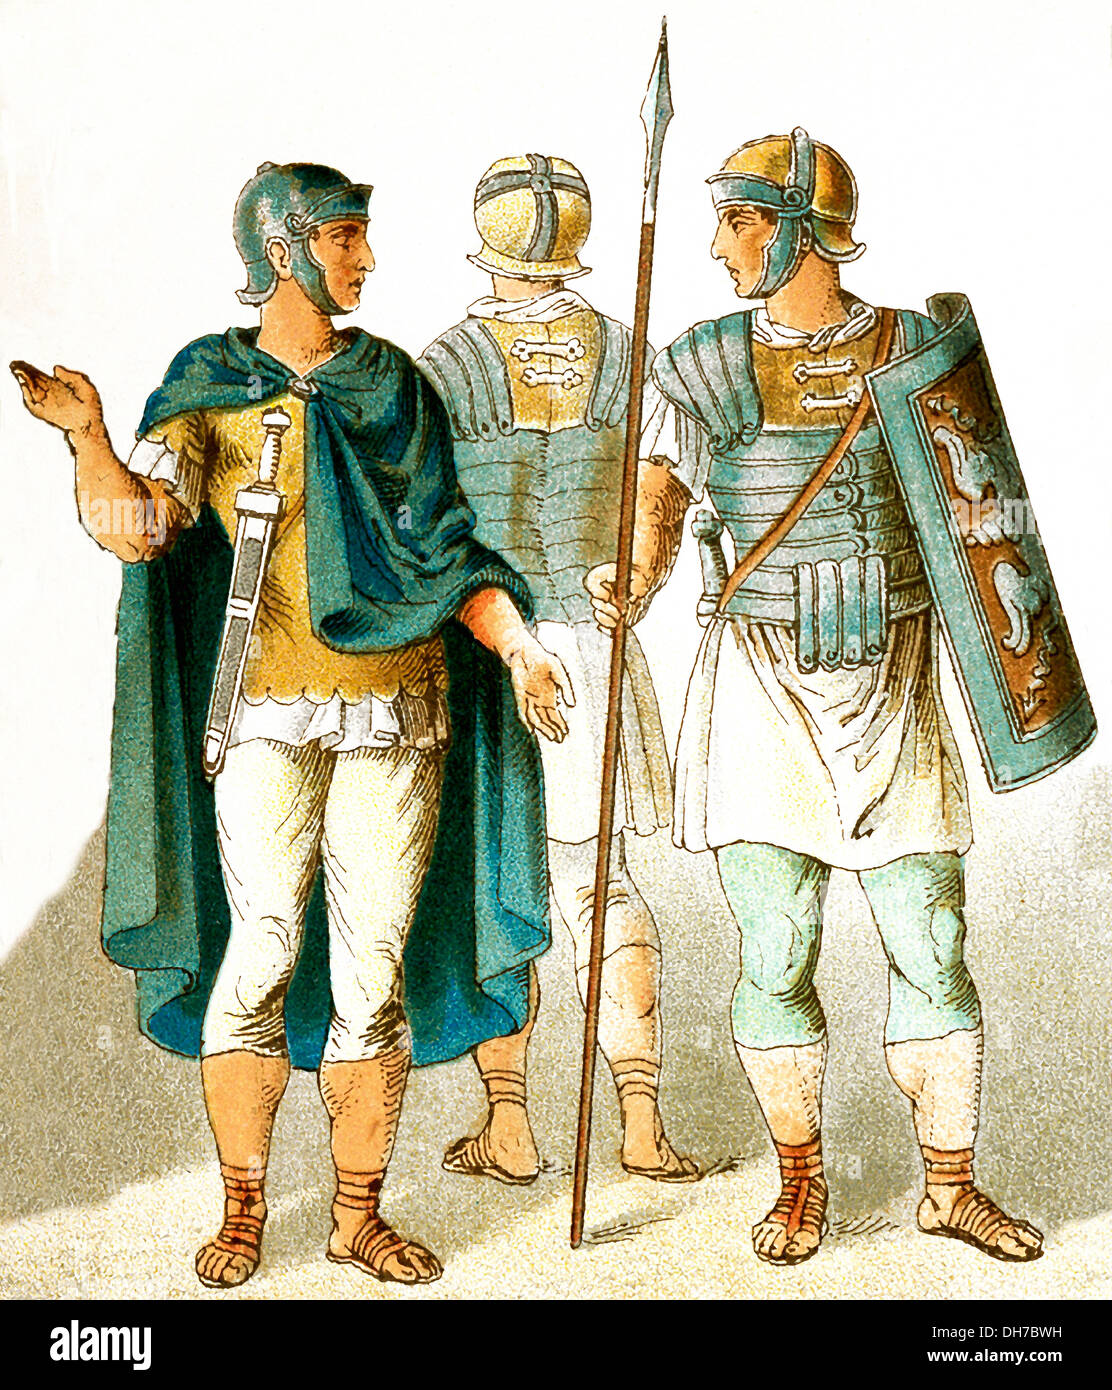 The figures represent three ancient Roman military personnel. The illustration dates to 1882. Stock Photo